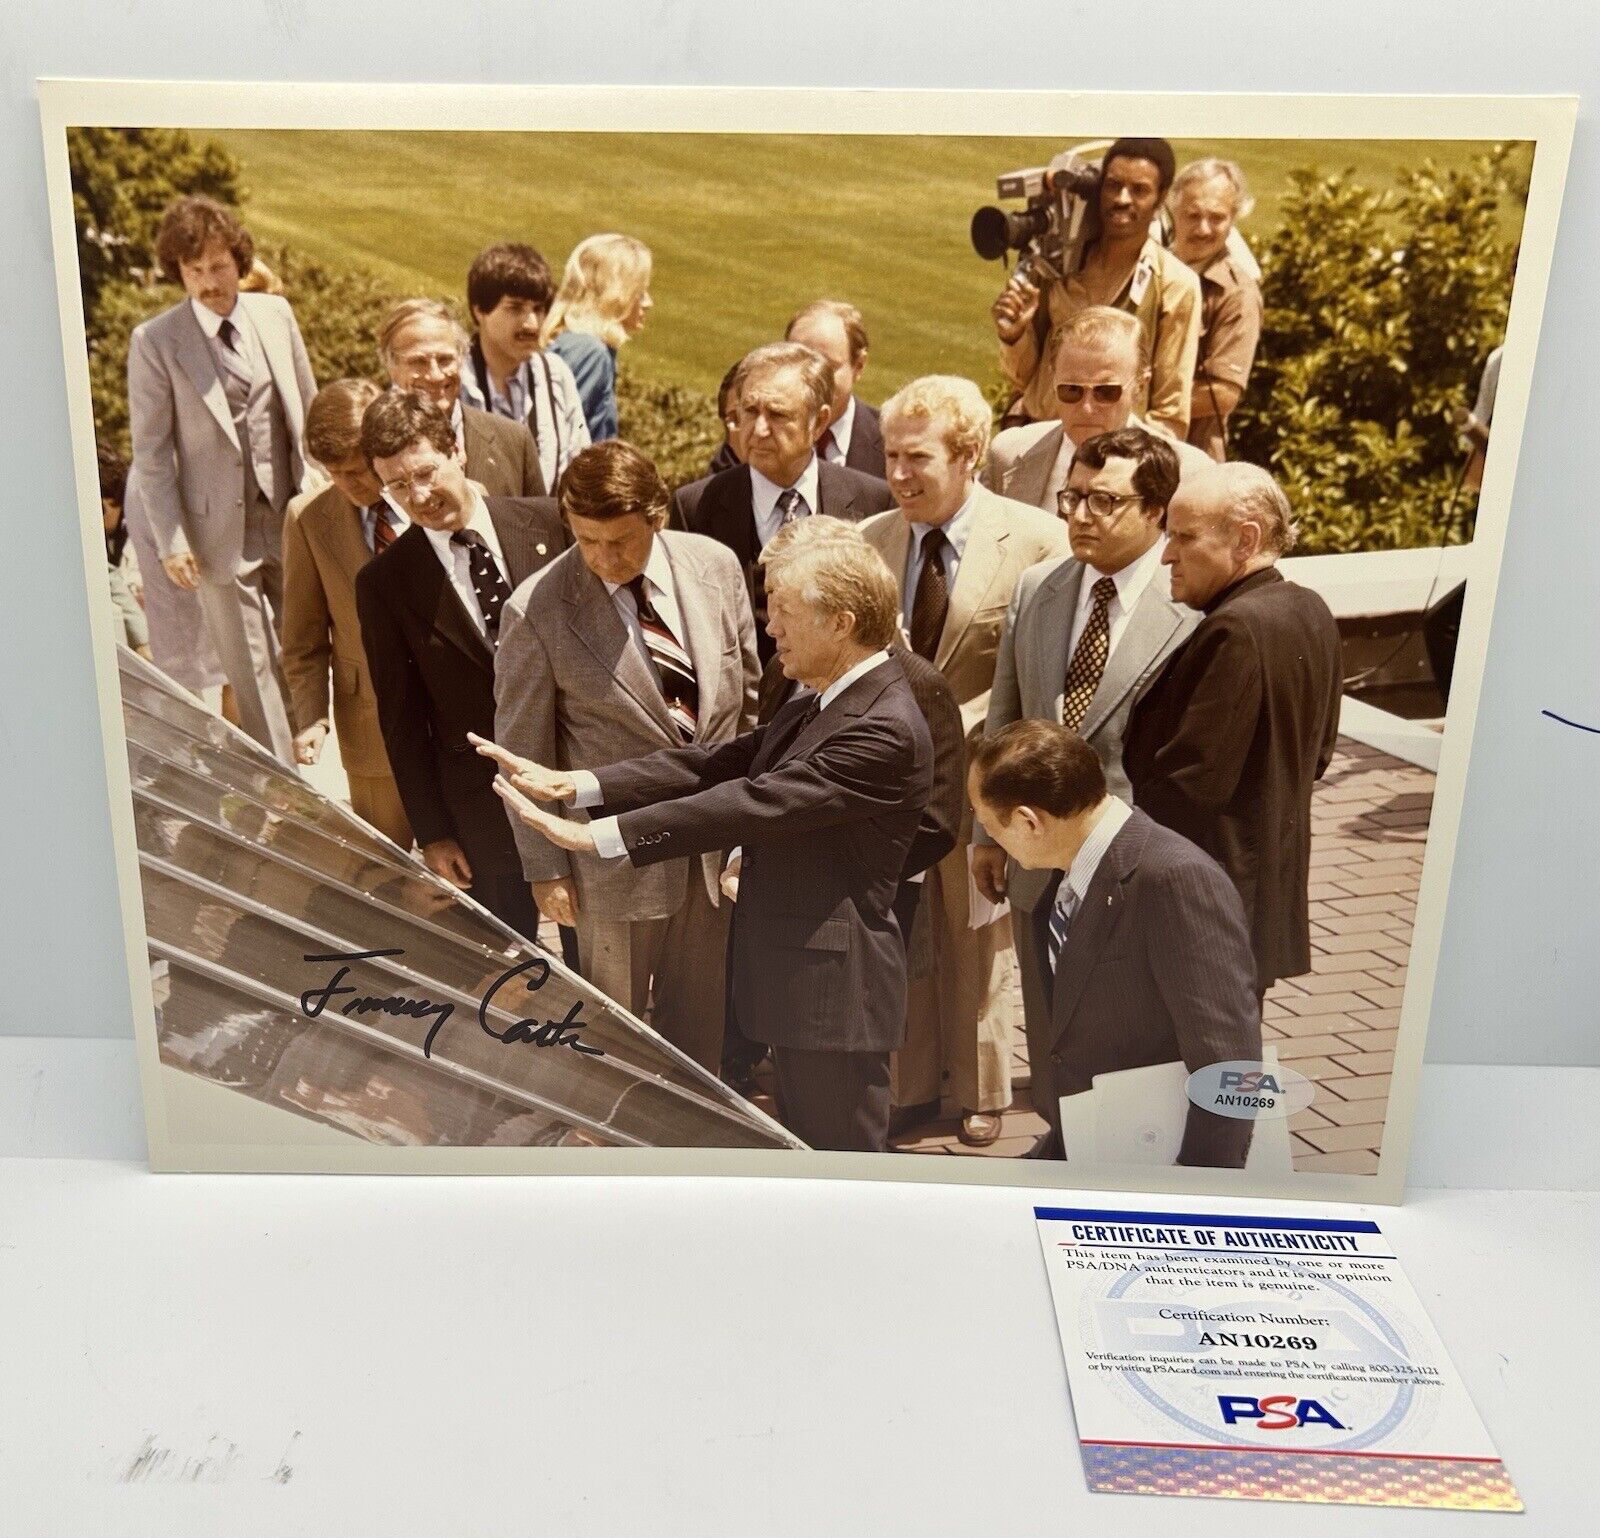 Jimmy Carter Signed 8x10 Official White House Photo Full Signature PSA DNA COA